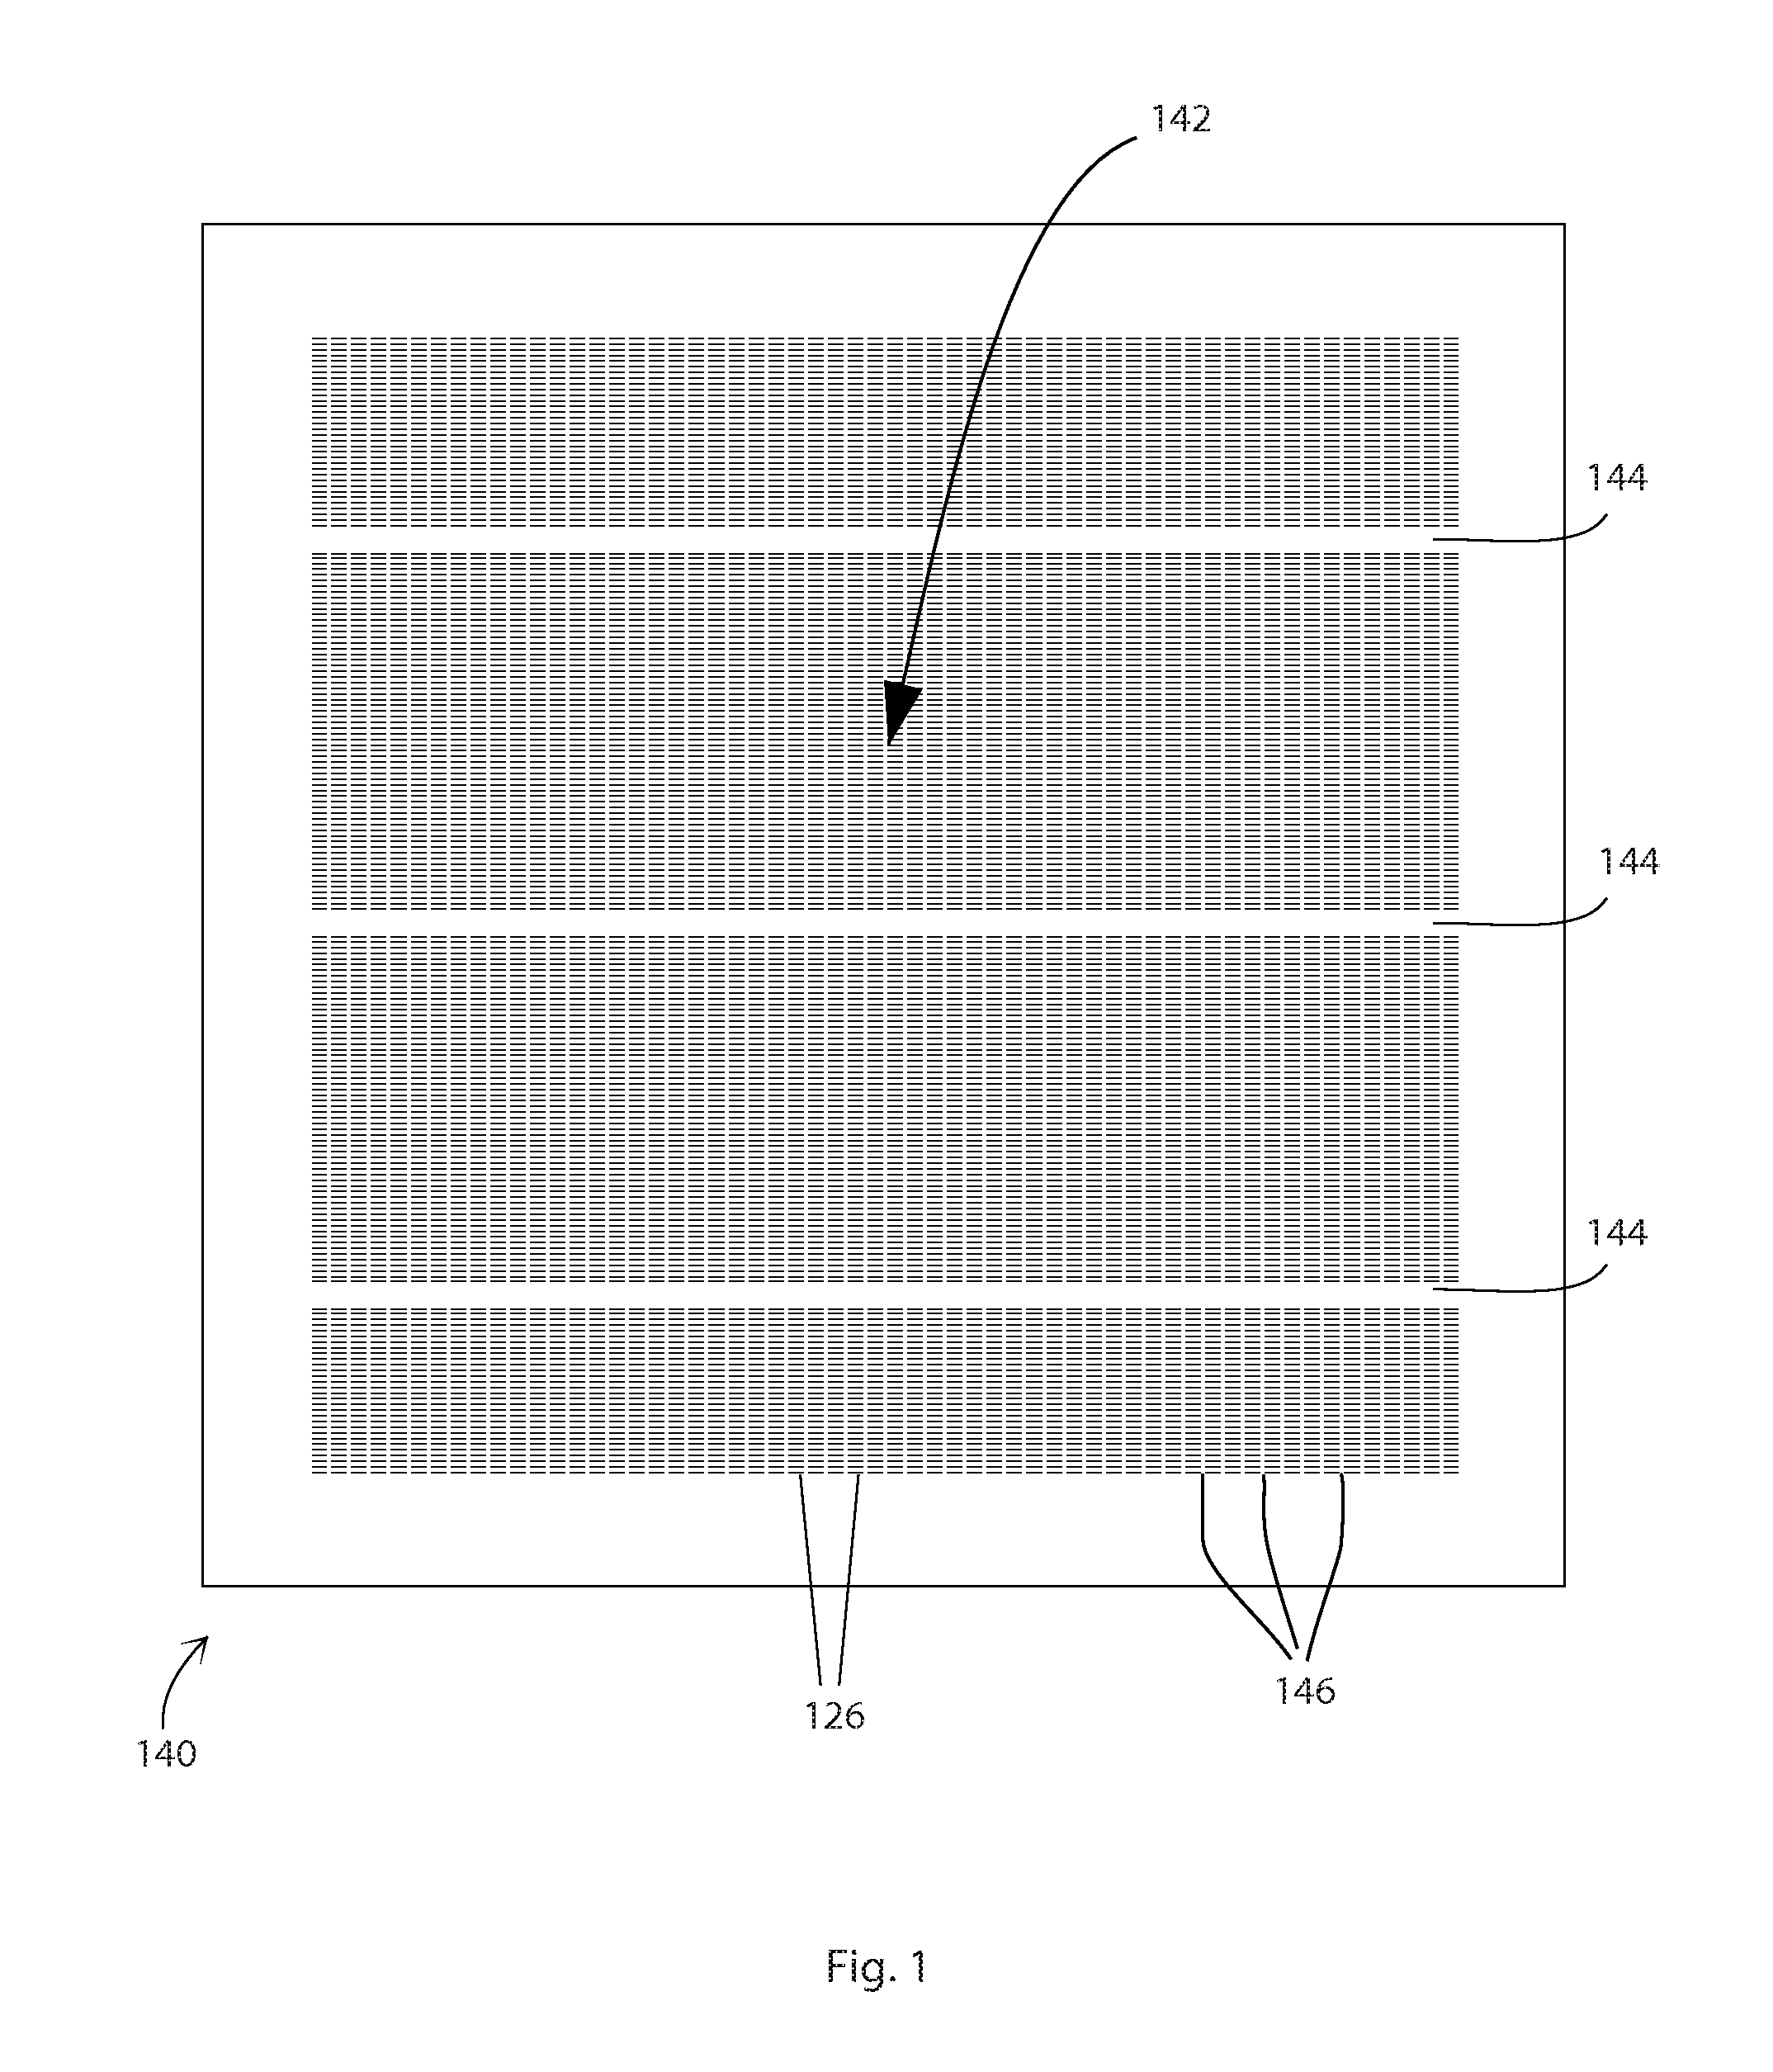 Dispensing liquid containing material to patterned surfaces using a dispensing tube